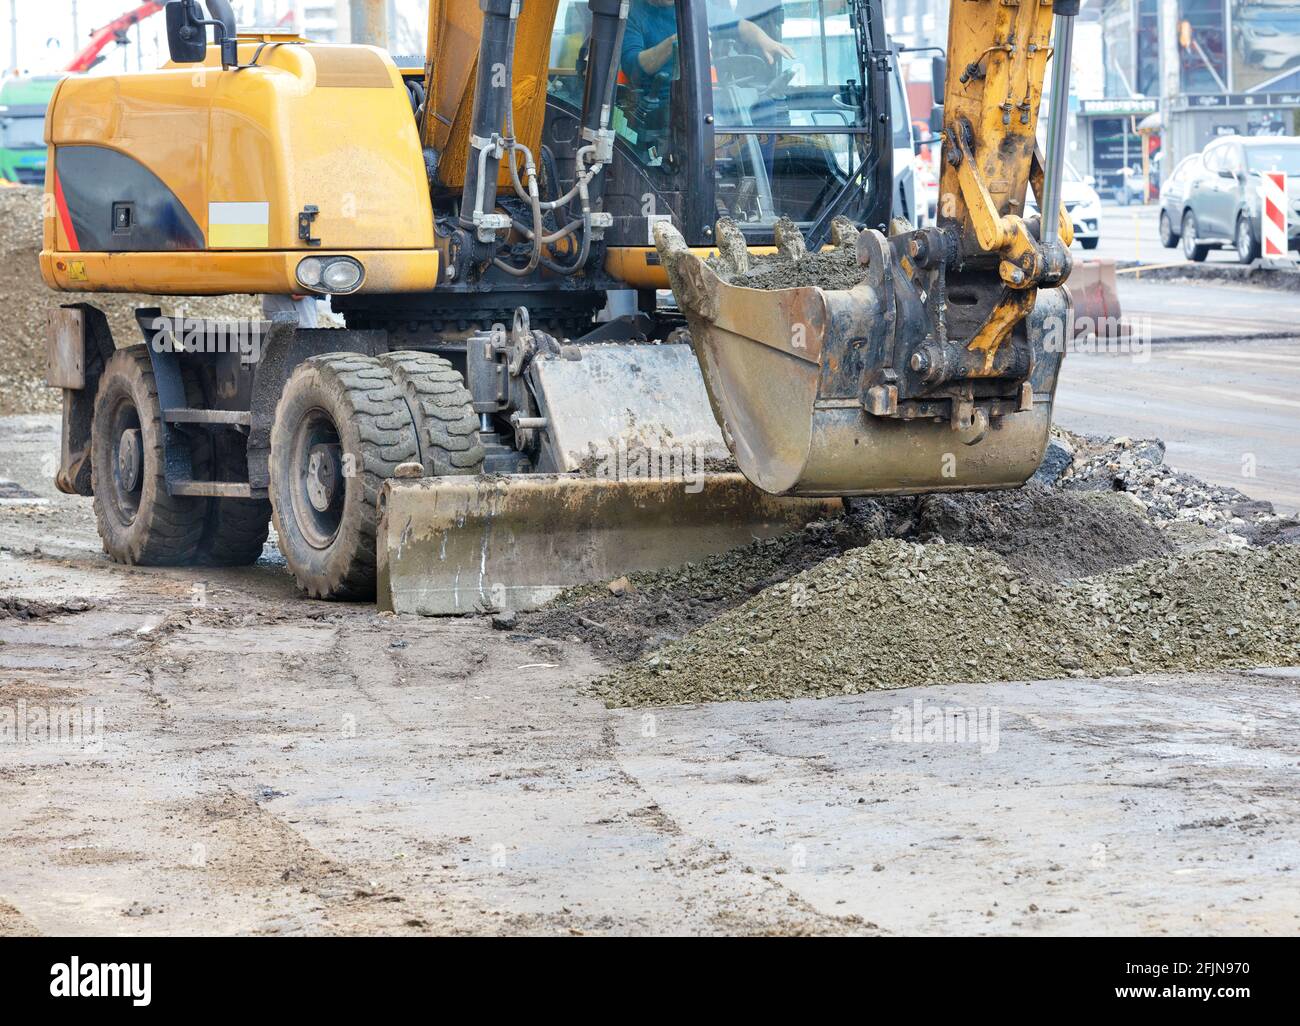 A road excavator bucket evenly distributes rubble to create a foundation on a dirt construction site throughout the working day. Copy space. Stock Photo